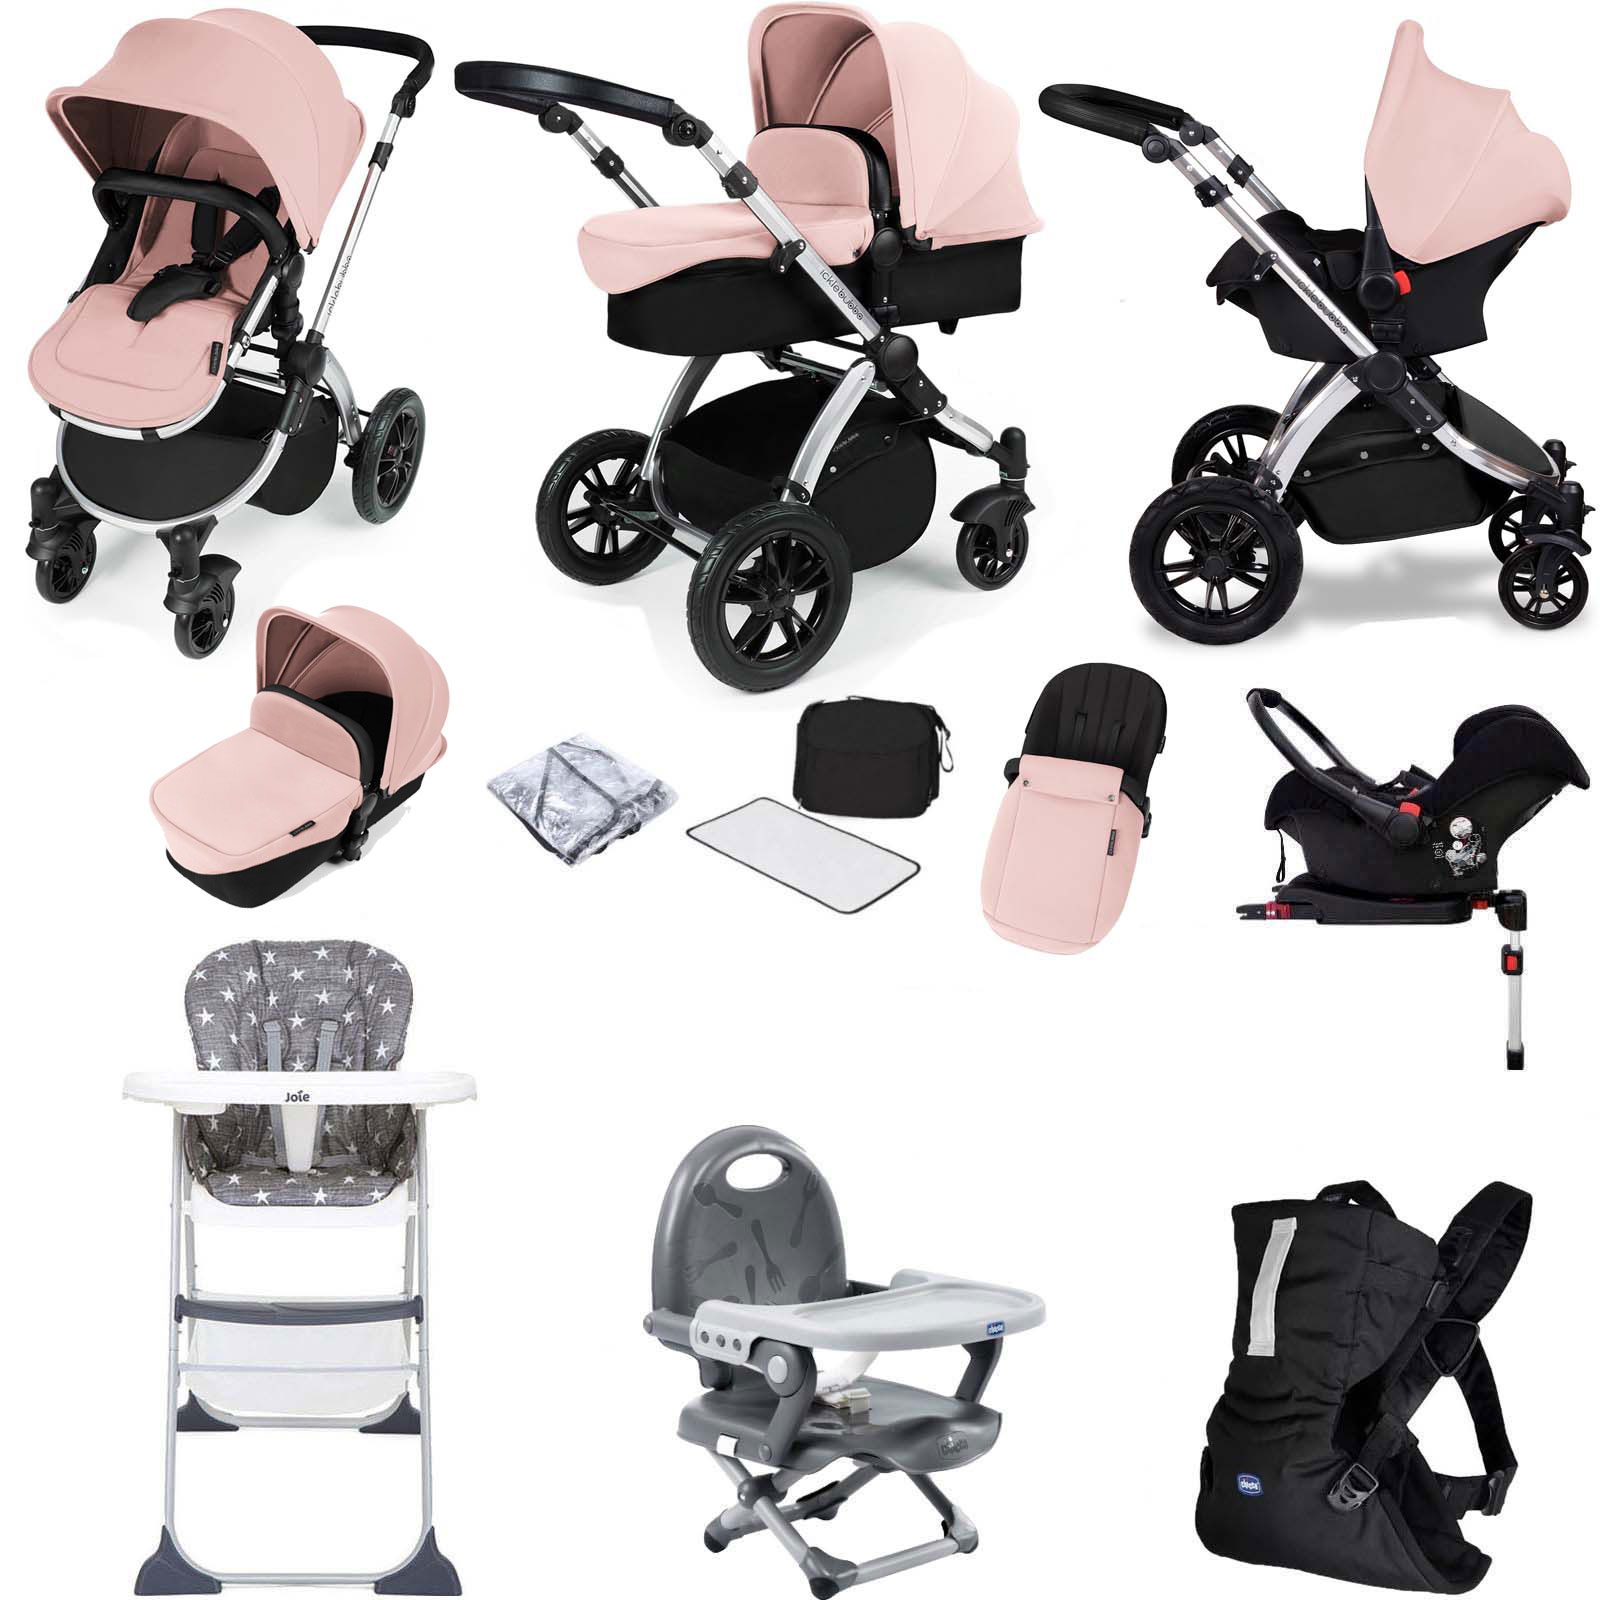 Ickle Bubba Stomp V3 Galaxy (Chrome Frame) Everything You Need Travel System Bundle - Pink